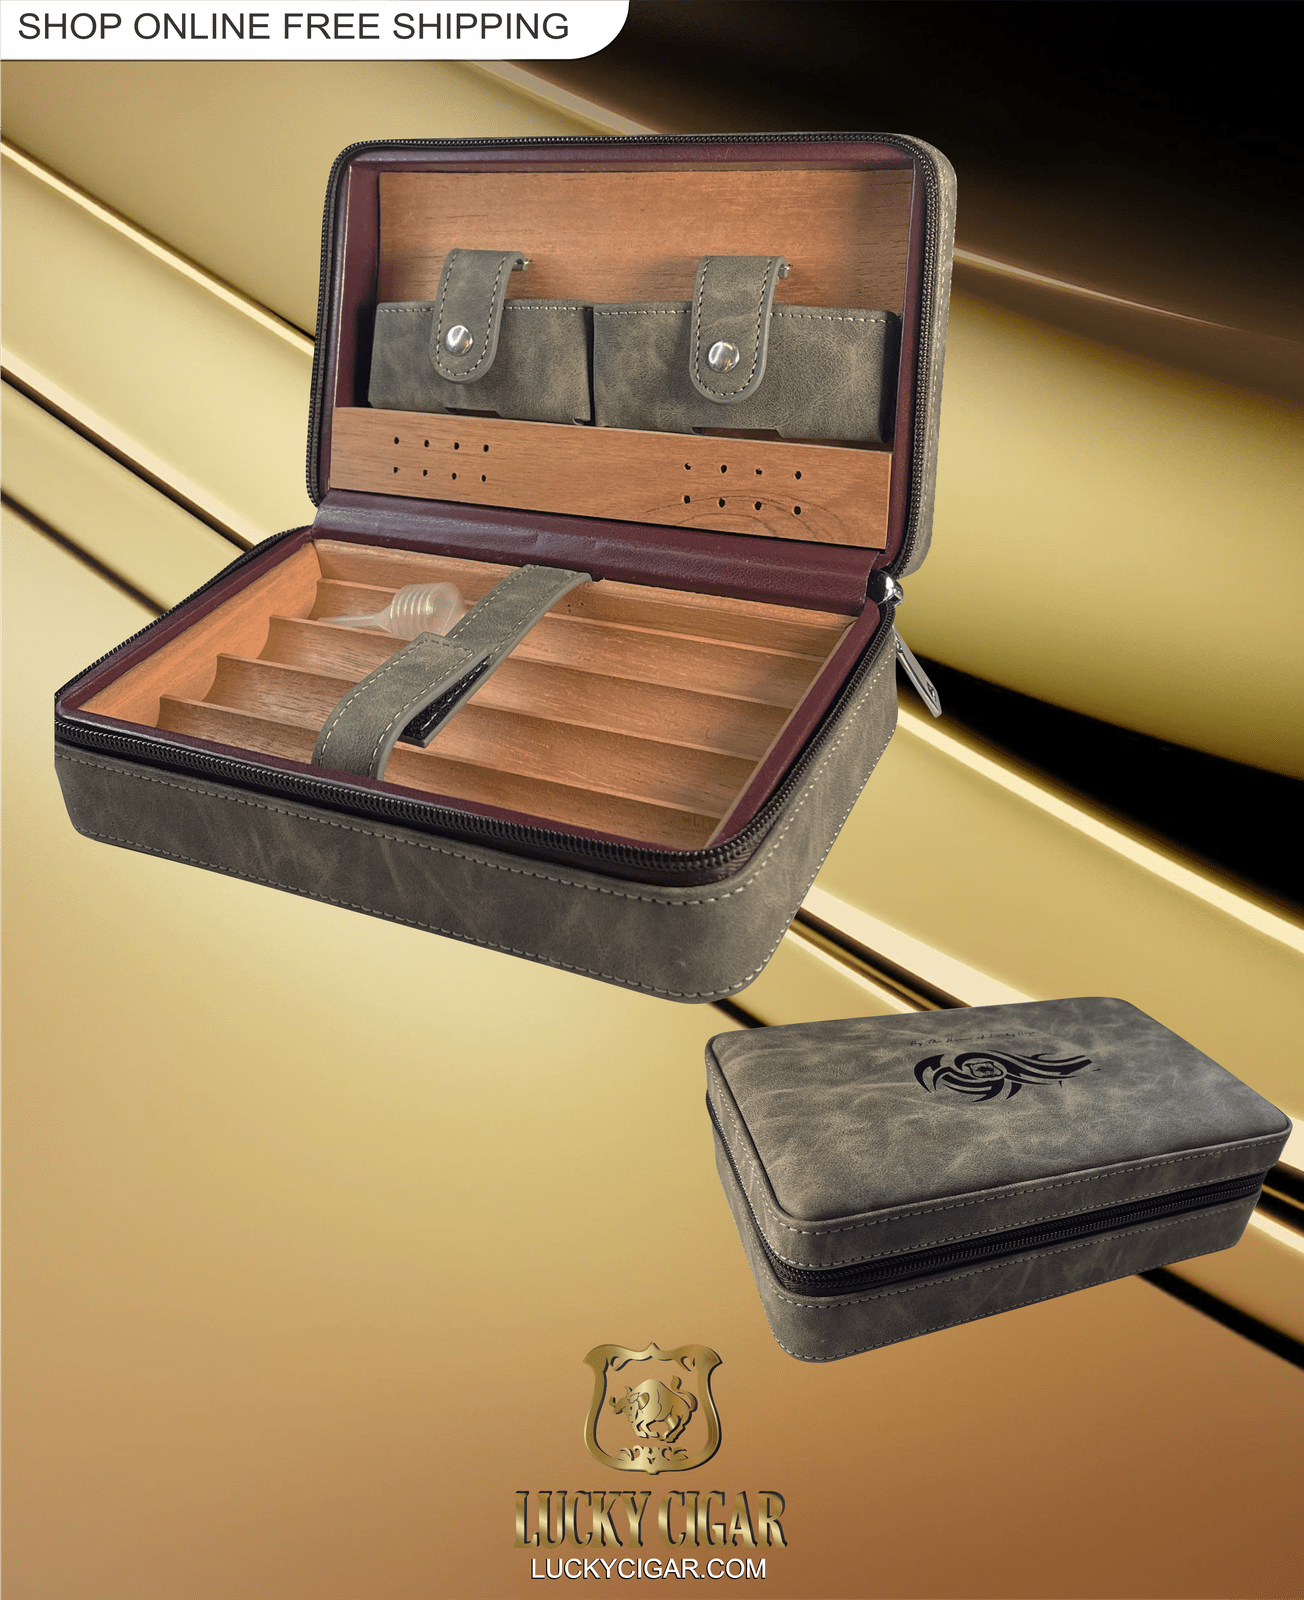 Cigar Lifestyle Accessories: Travel Humidor with Weathered Look for 5 Cigars